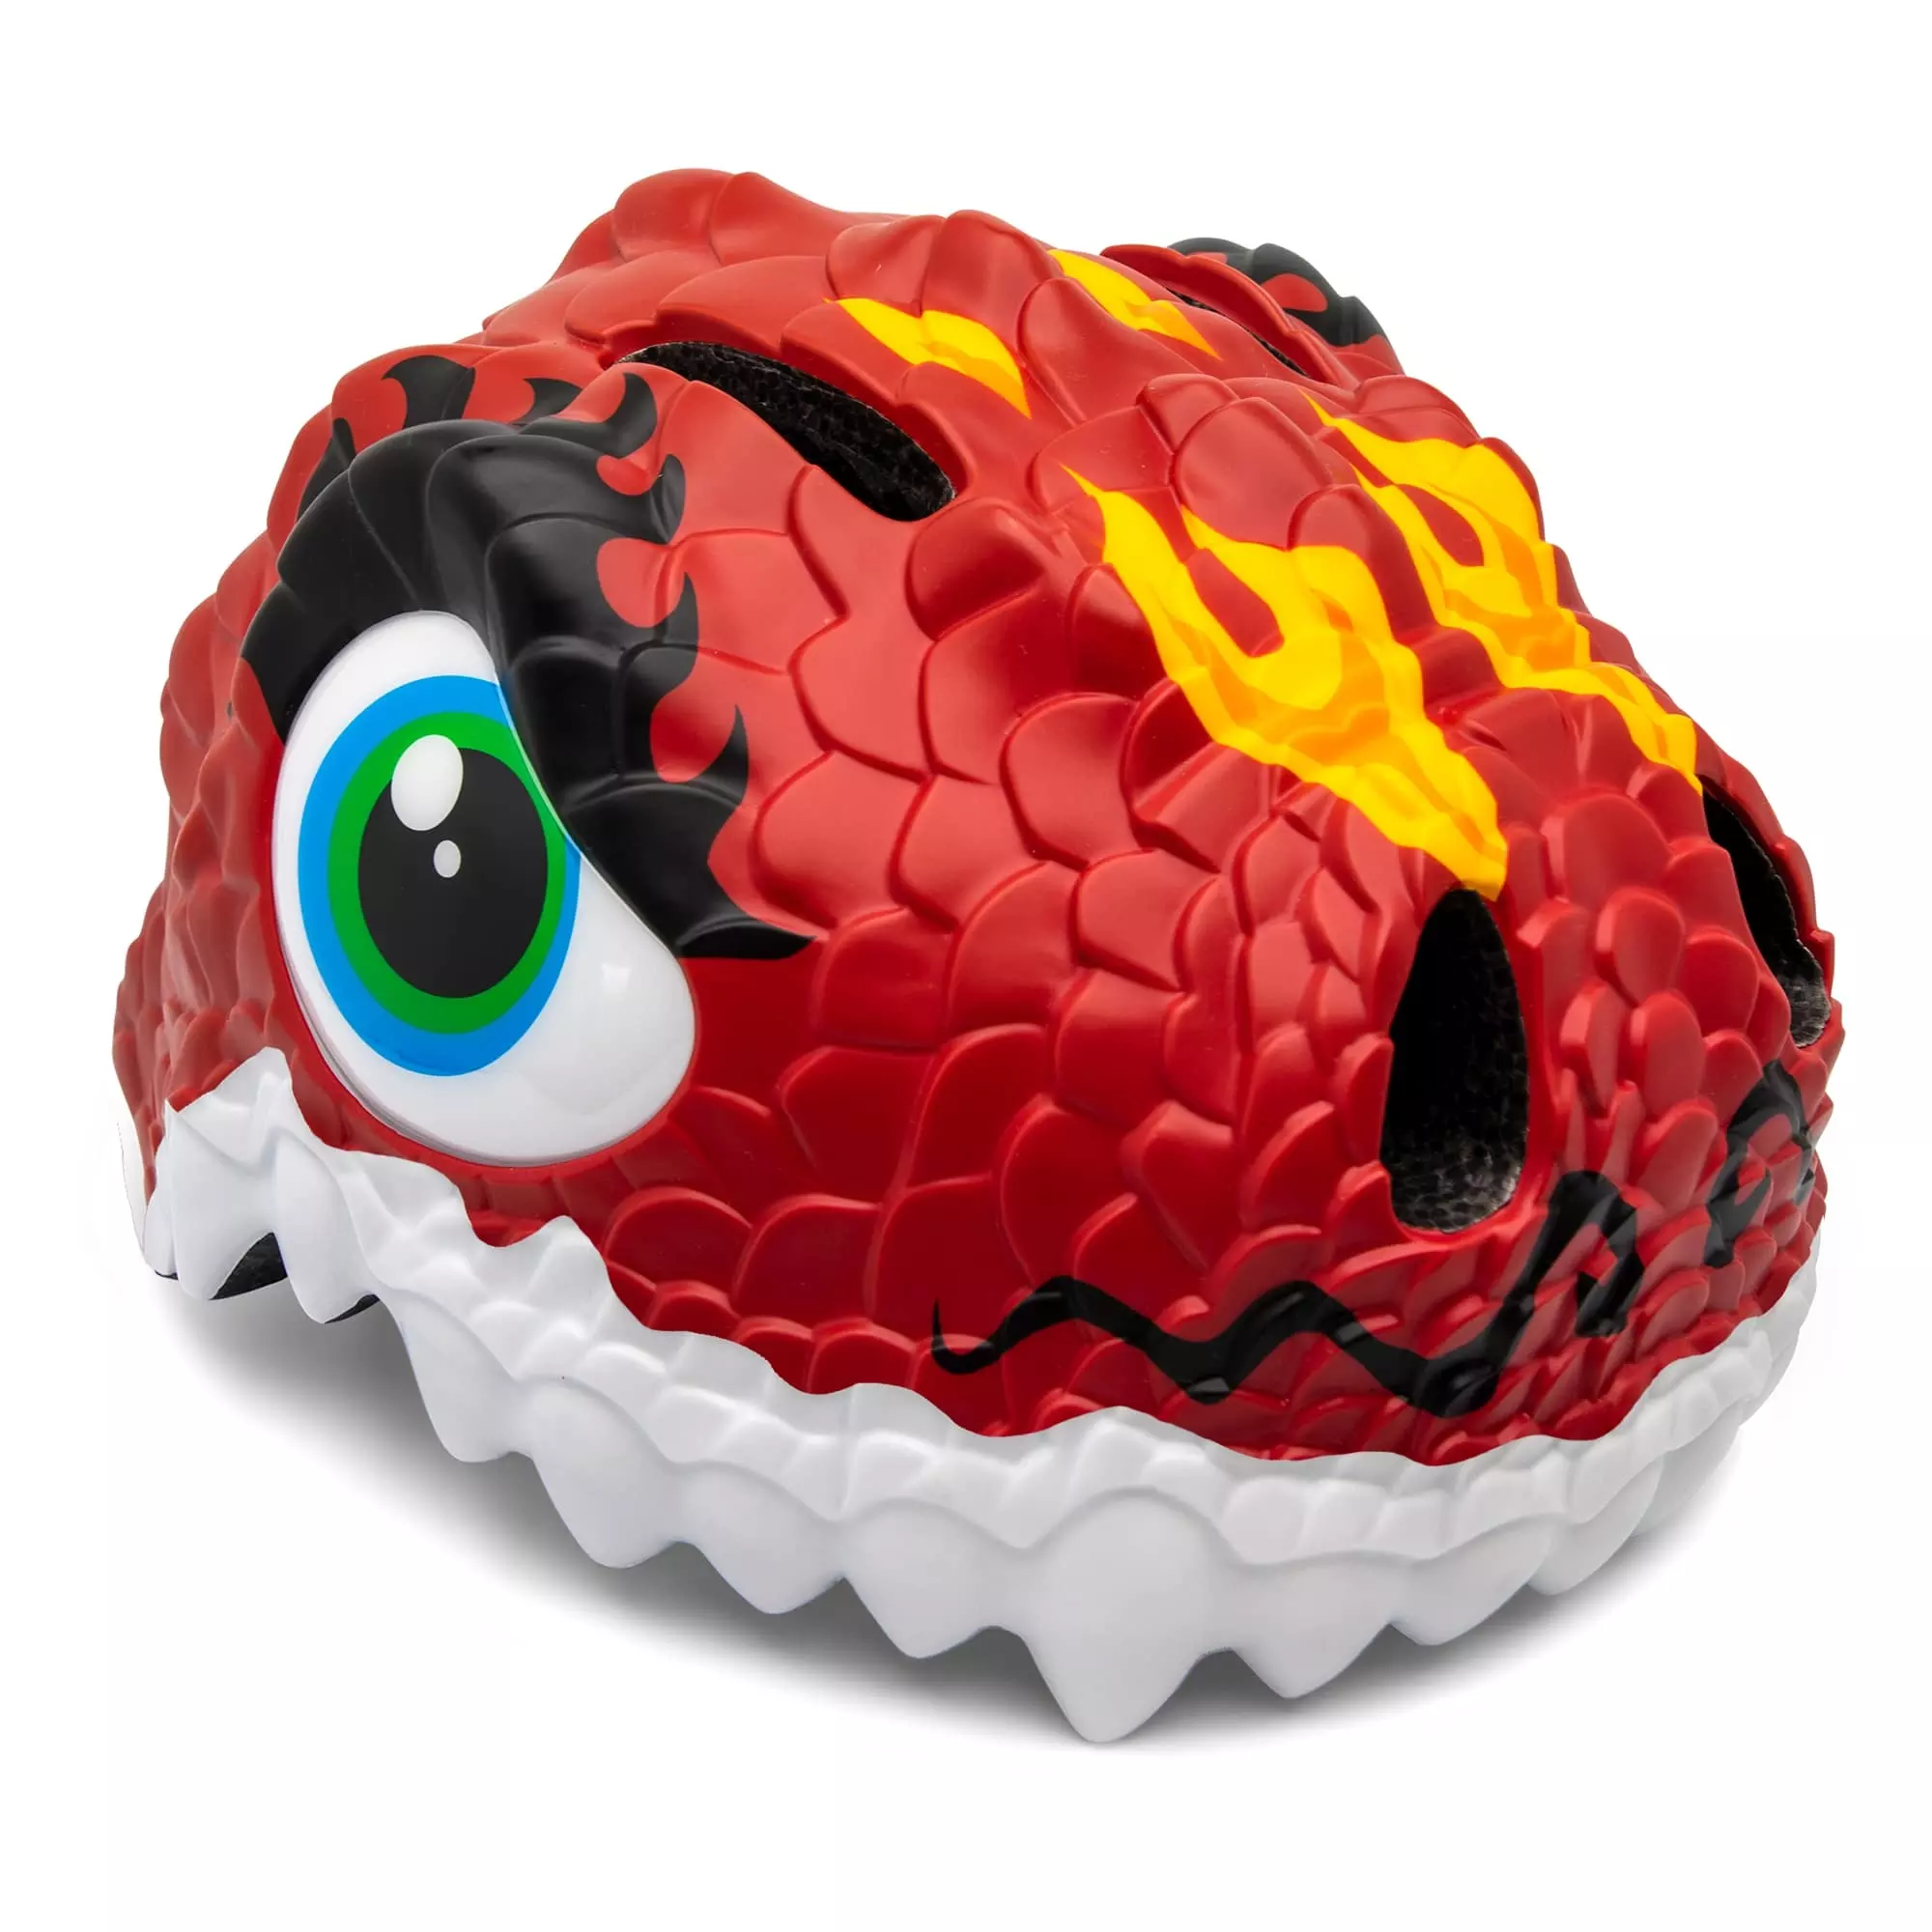 Crazy Safety Dragon Bicycle Helmet Red